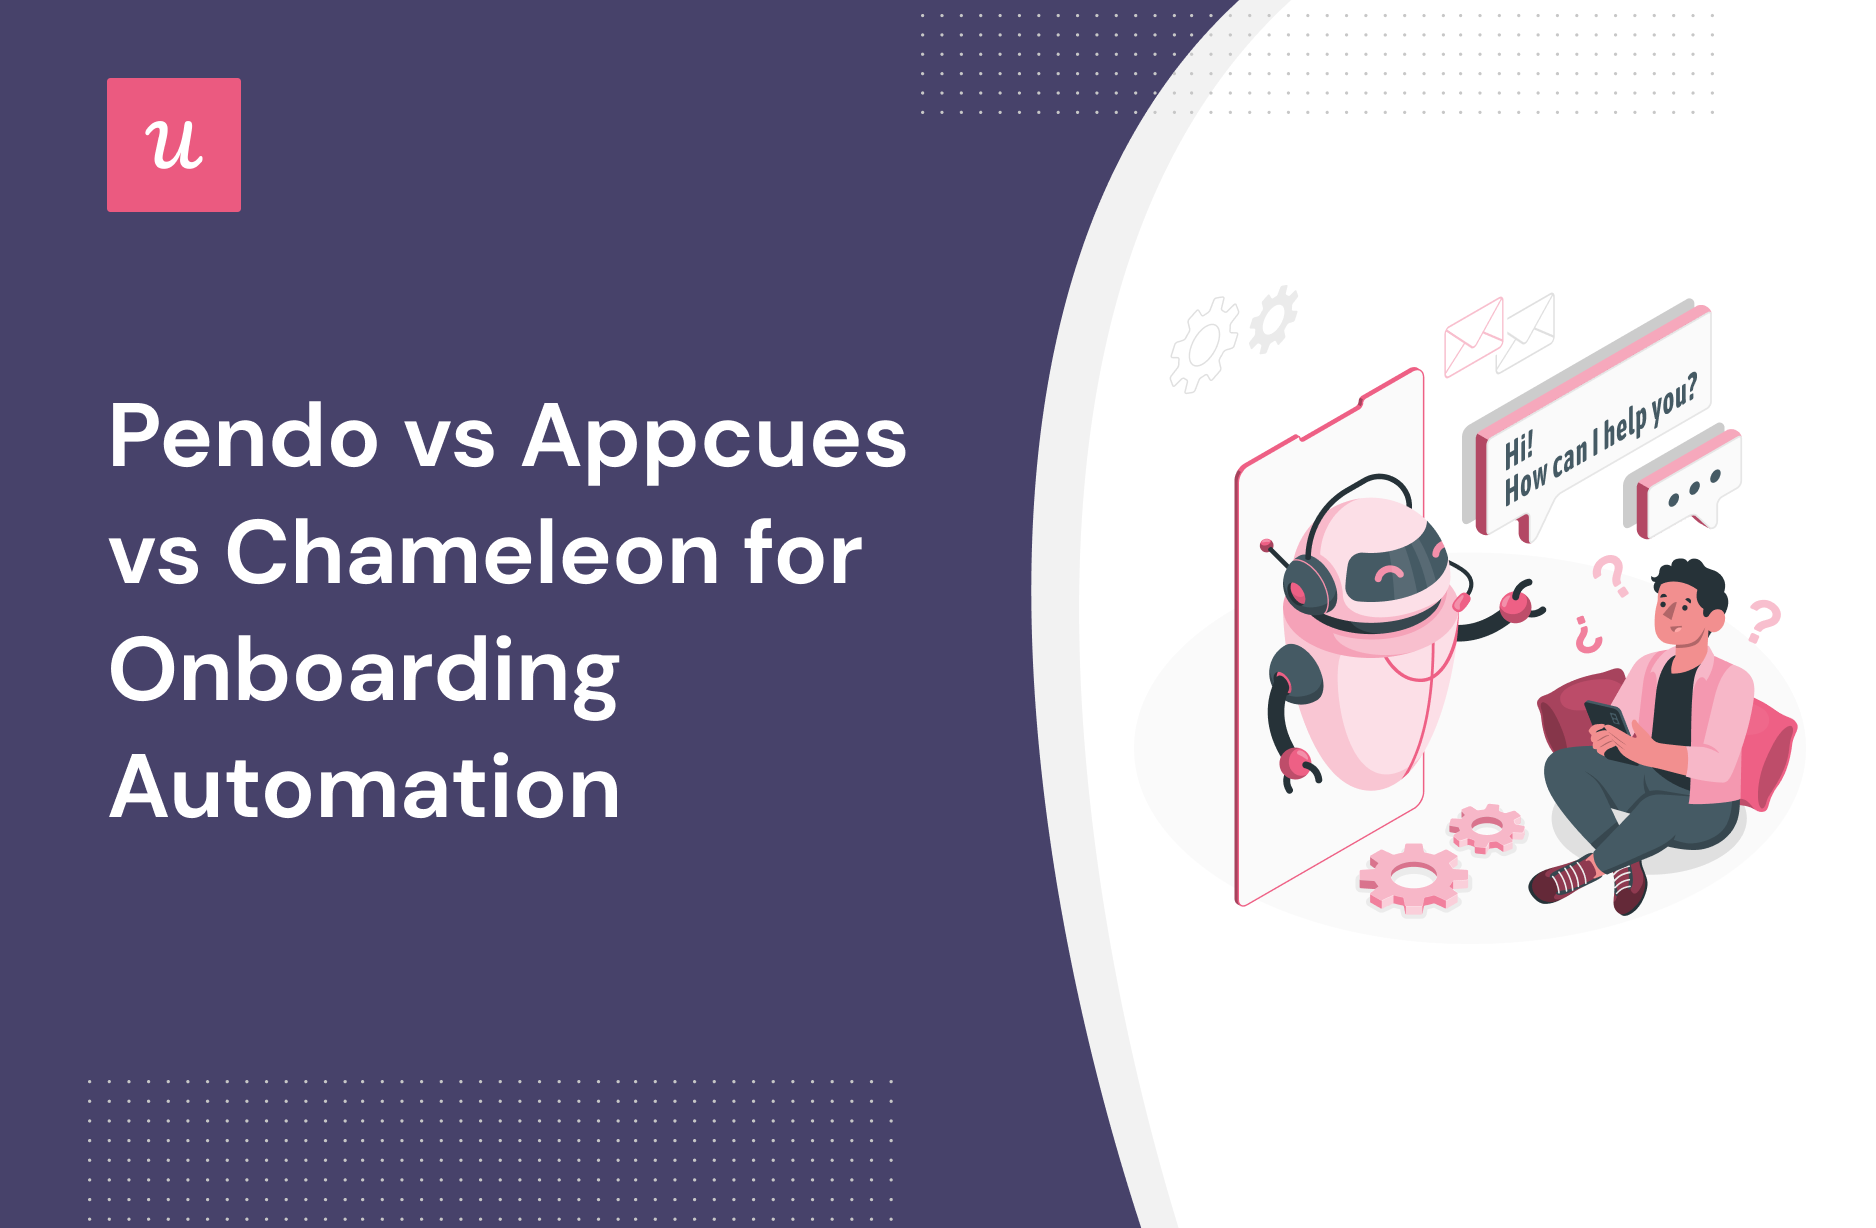 Pendo vs Appcues vs Chameleon for Onboarding Automation